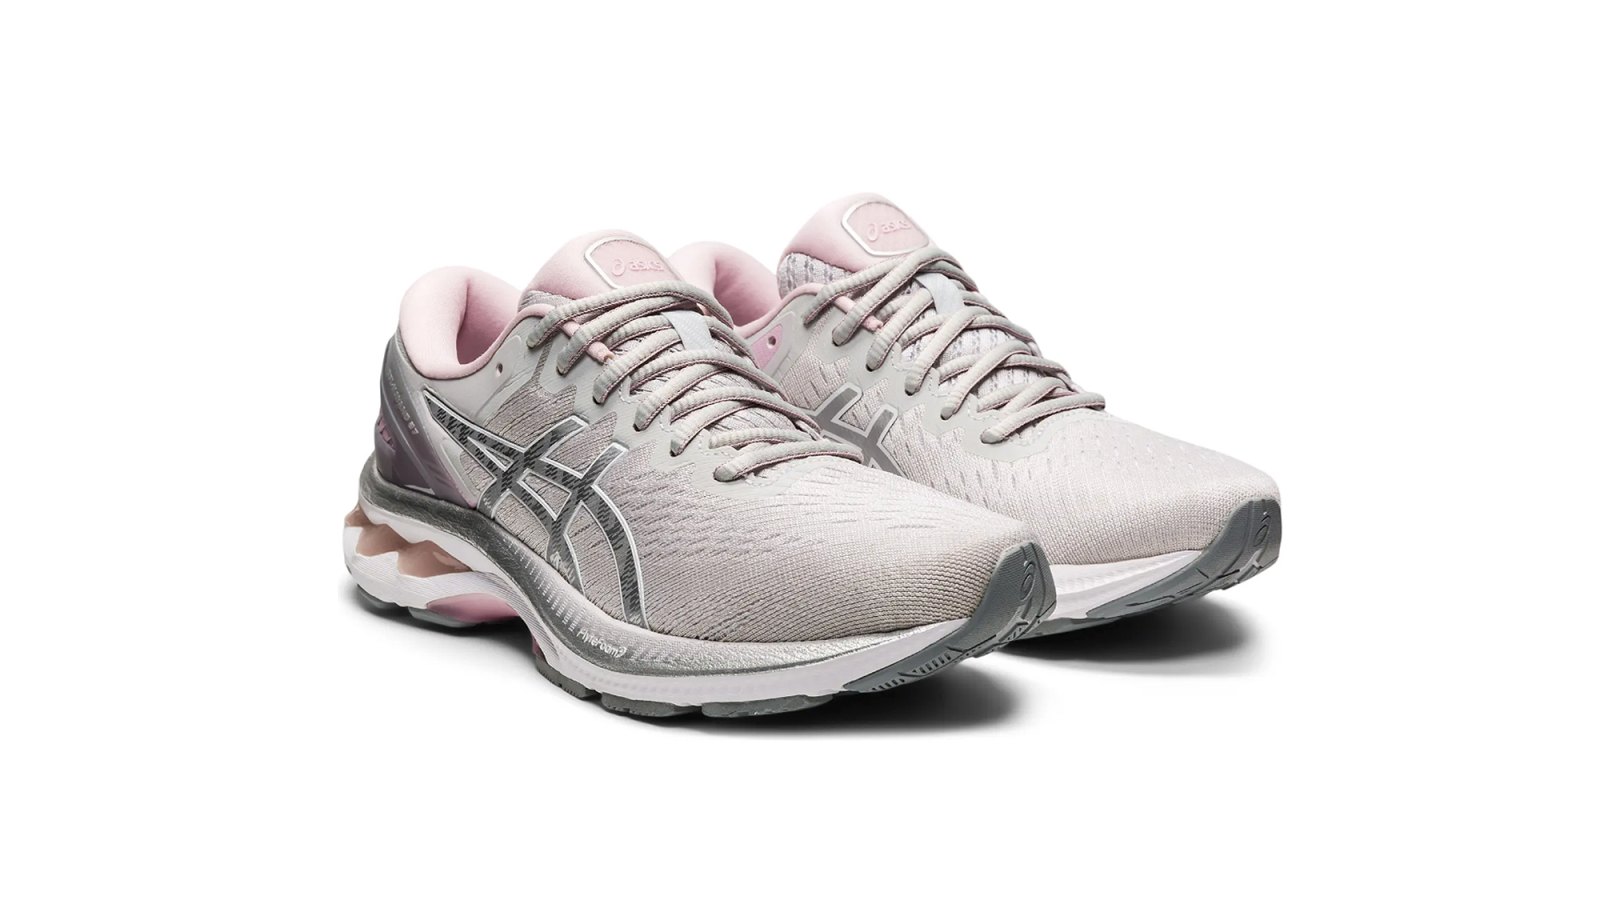 Asics Running Shoes Are $60 Off in the Nordstrom Anniversary Sale